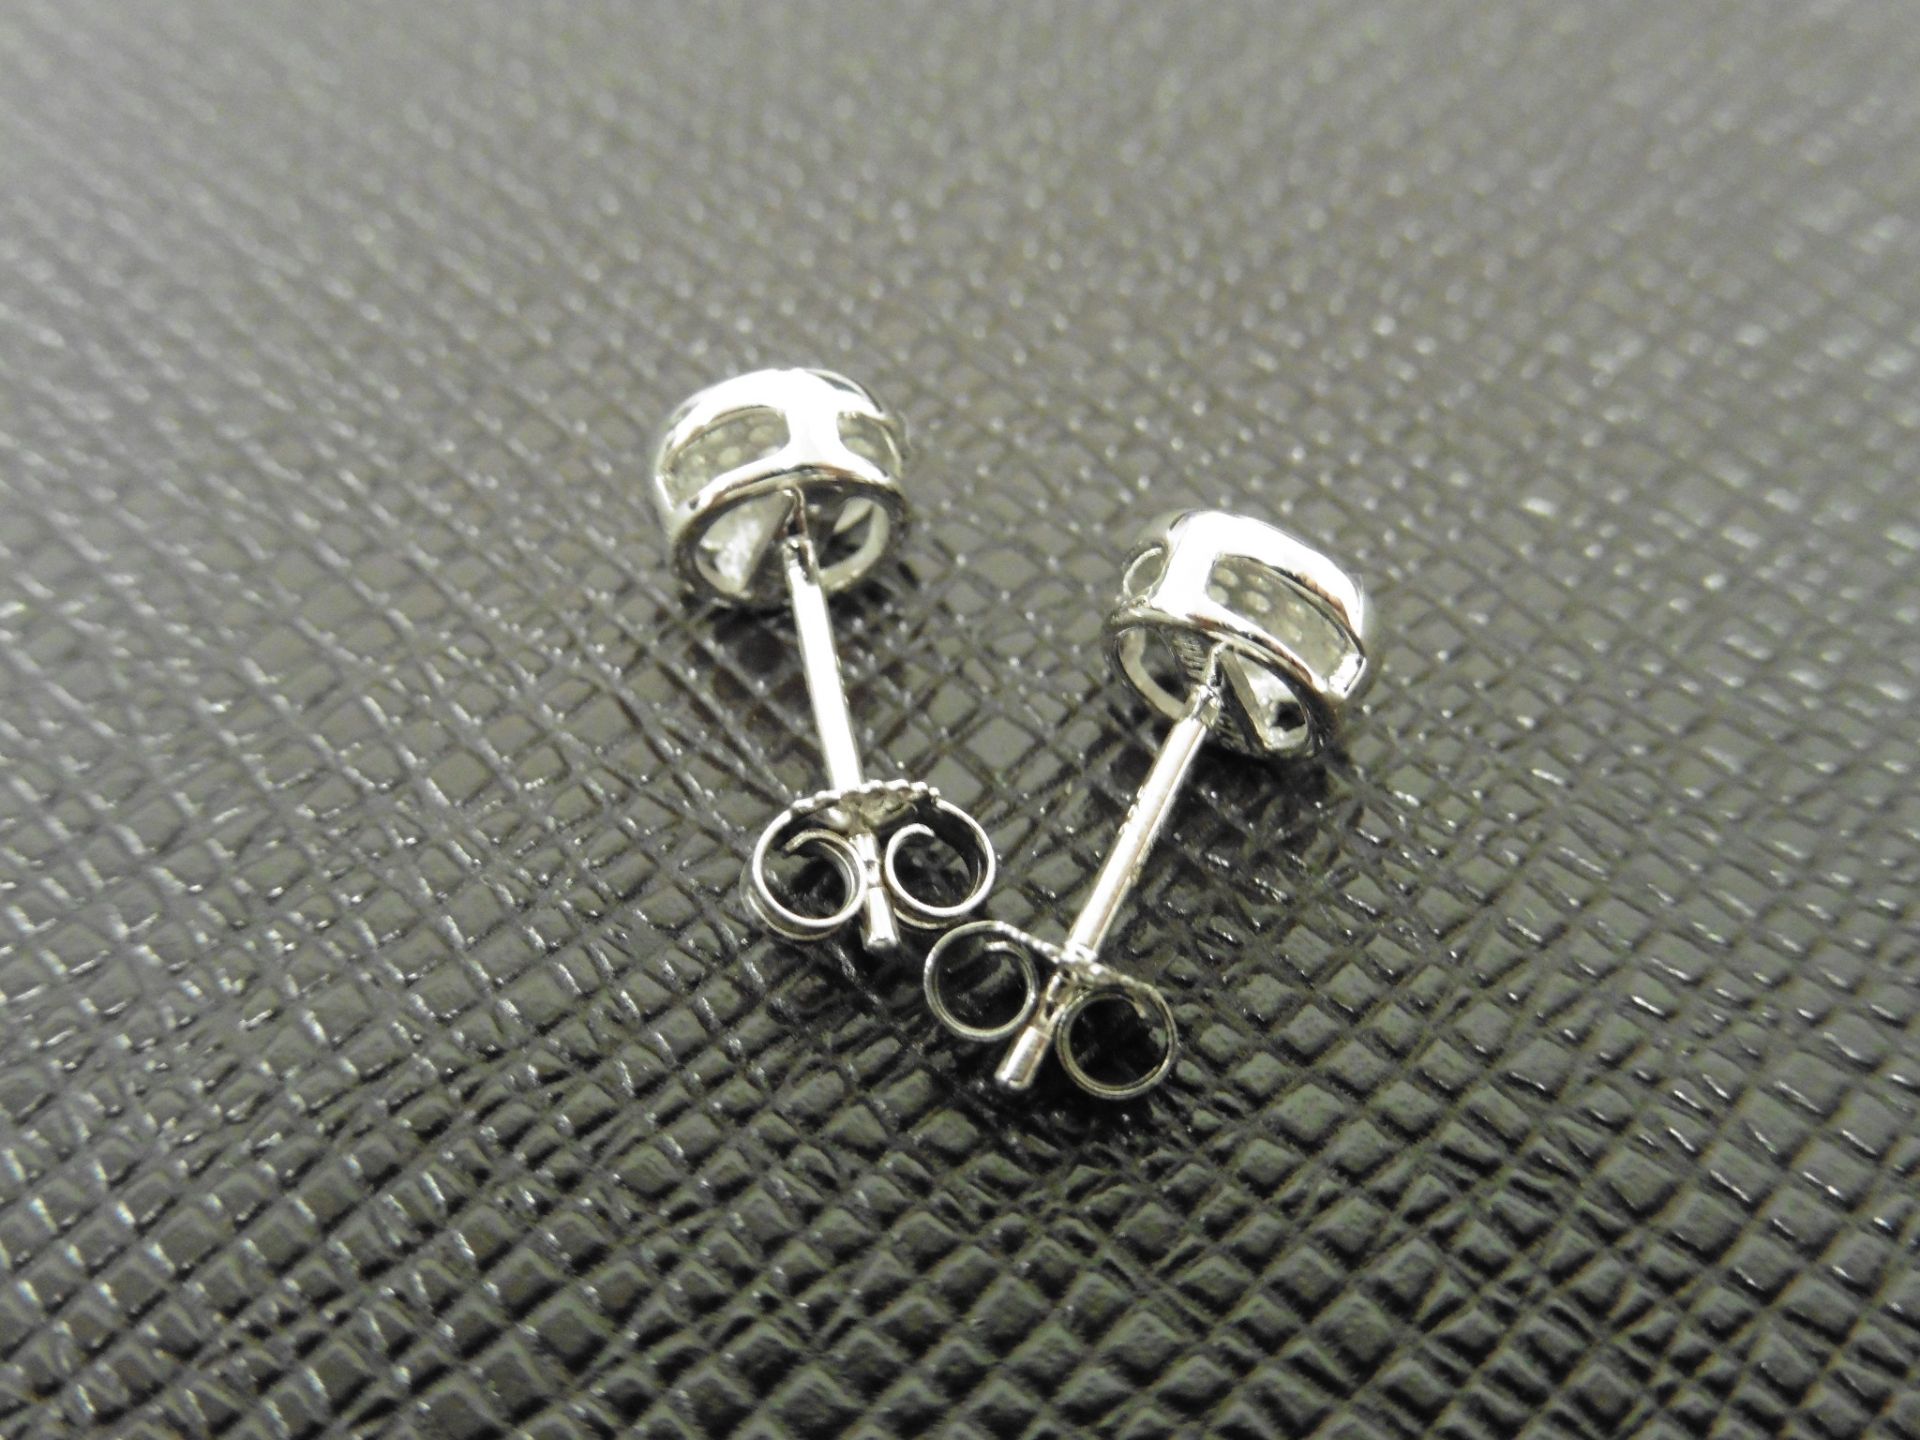 0.17ct illusion set diamond stud earrings in 9ct white gold. Small round cut diamonds, H colour - Image 3 of 3